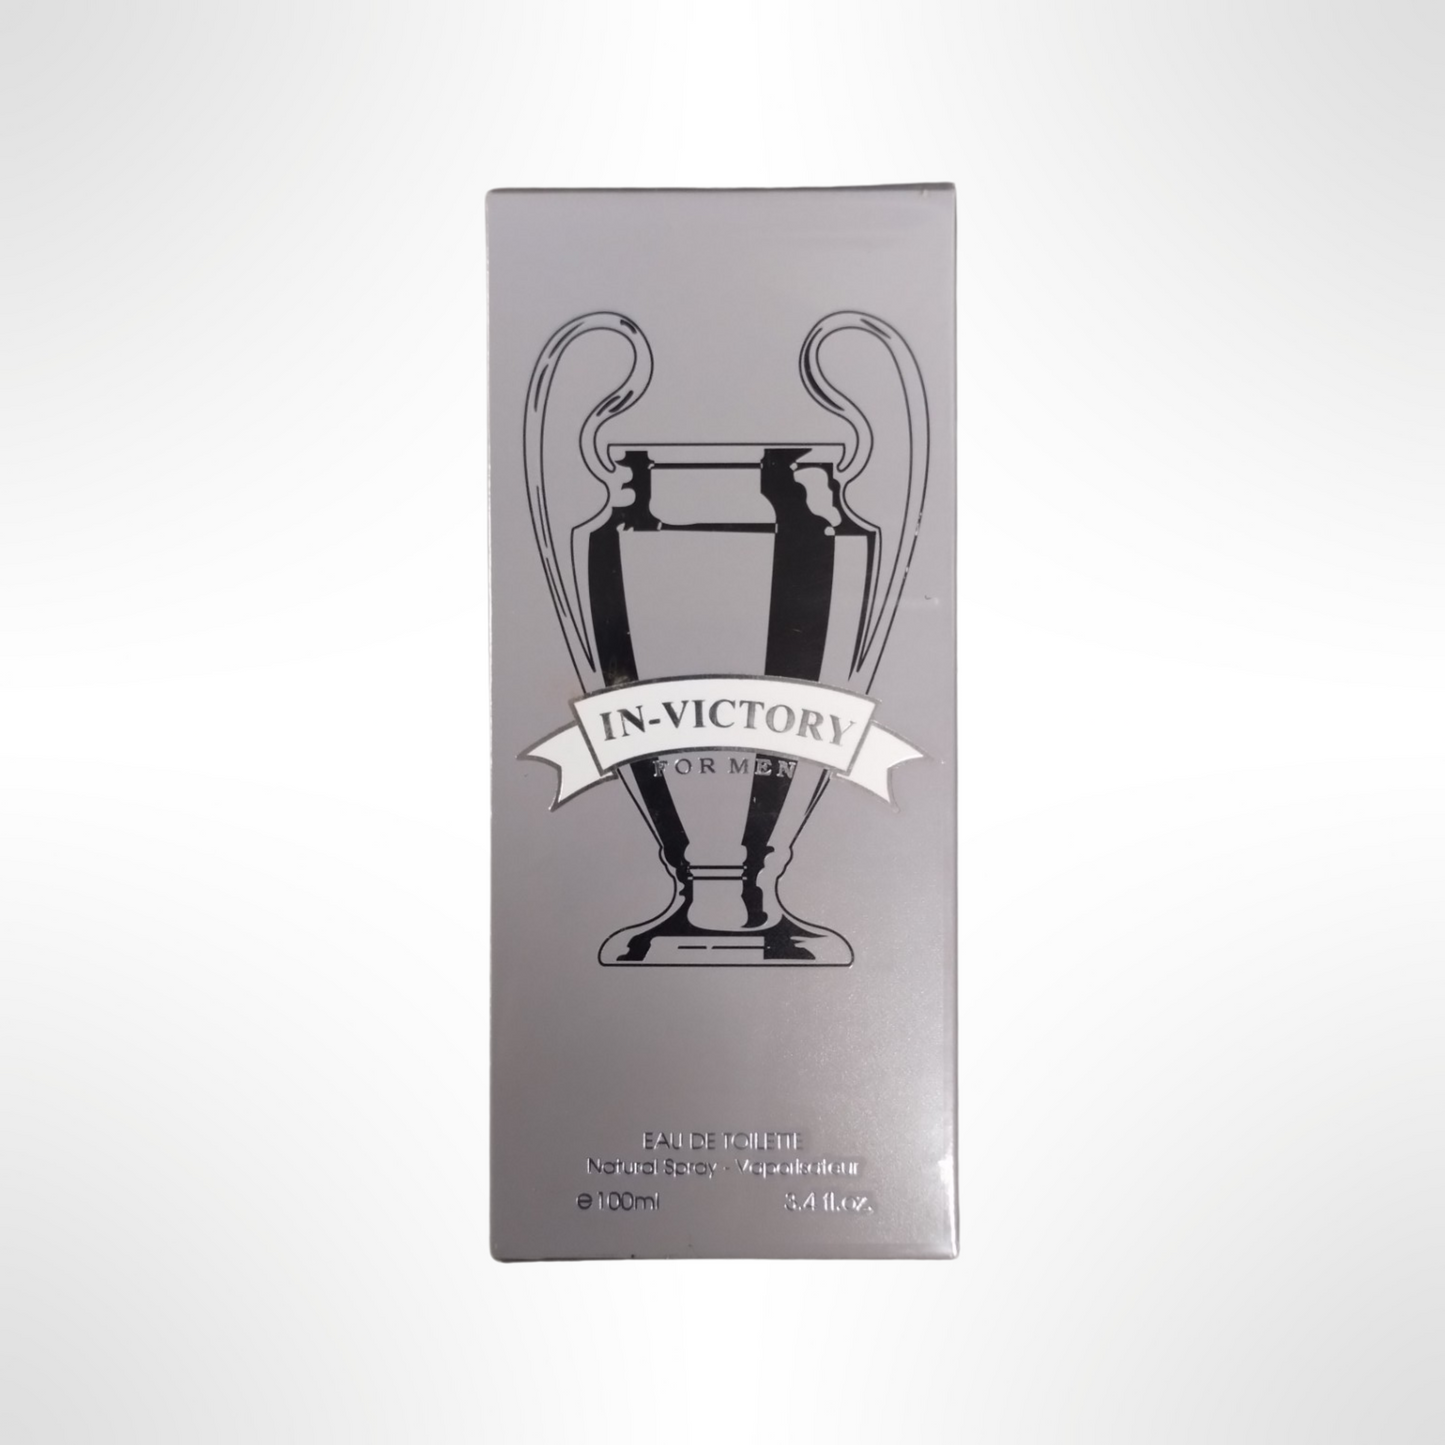 SP - In-Victory - Men's Cologne